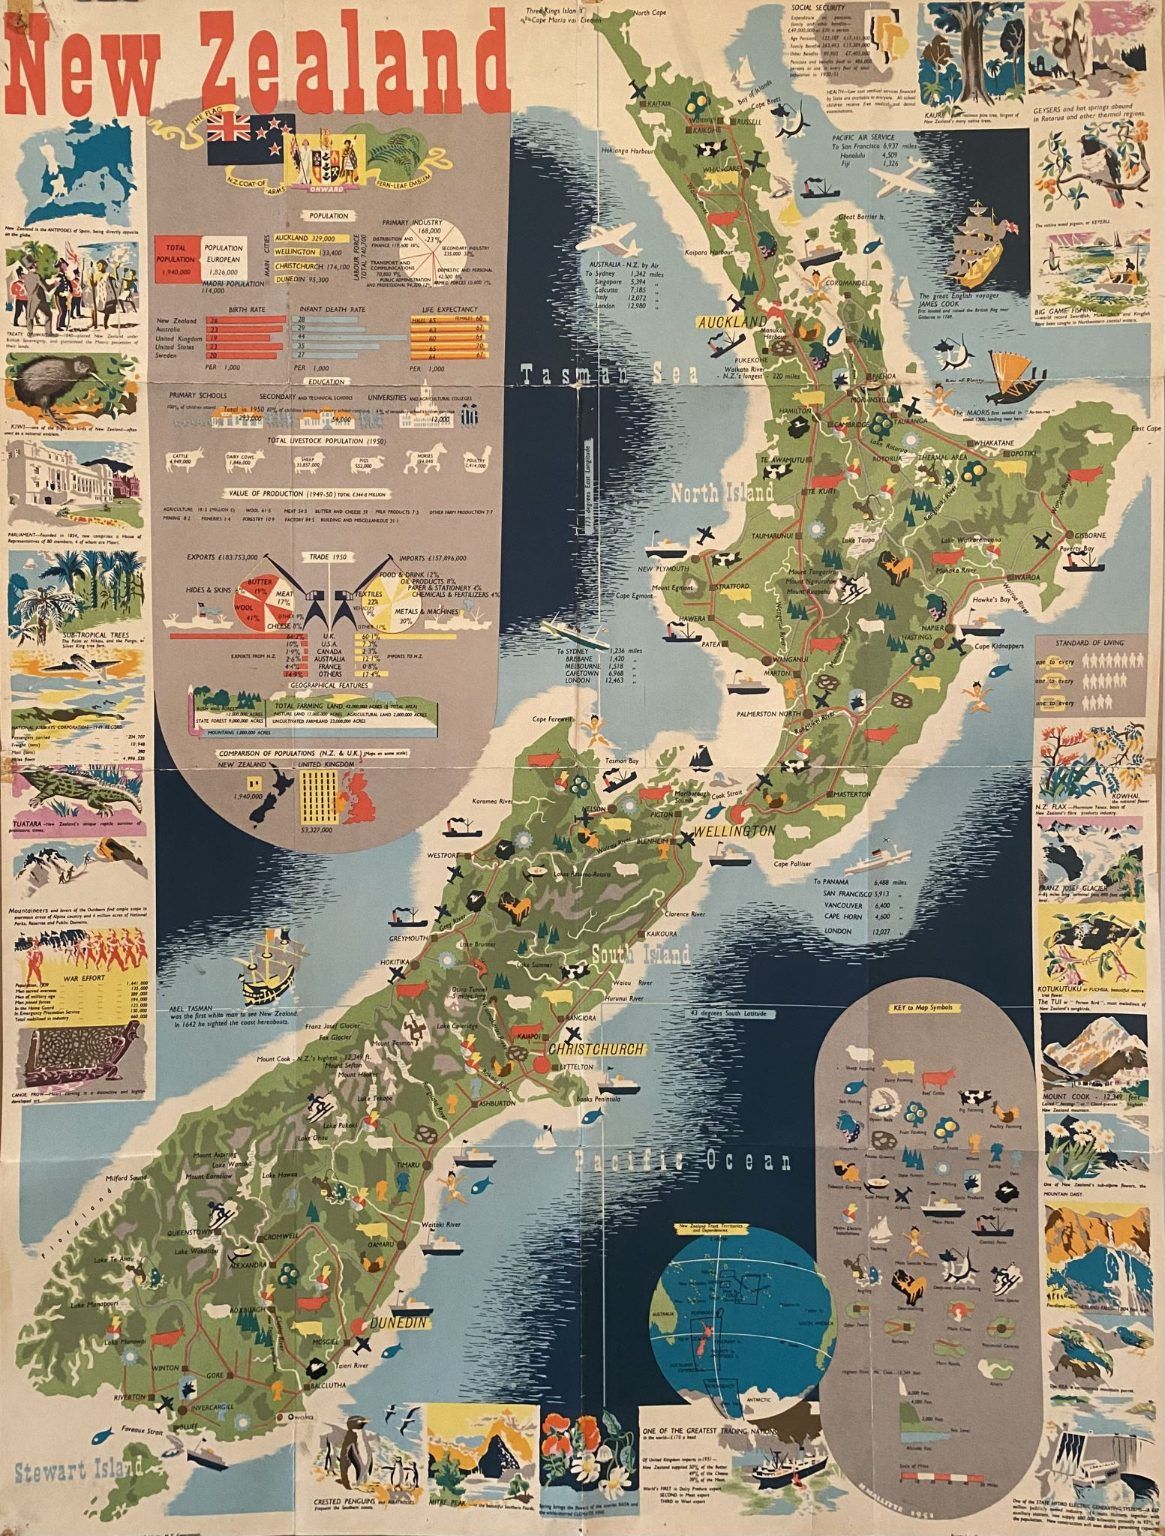 VINTAGE POSTER: New Zealand - Department of Tourism and Publicity 1951